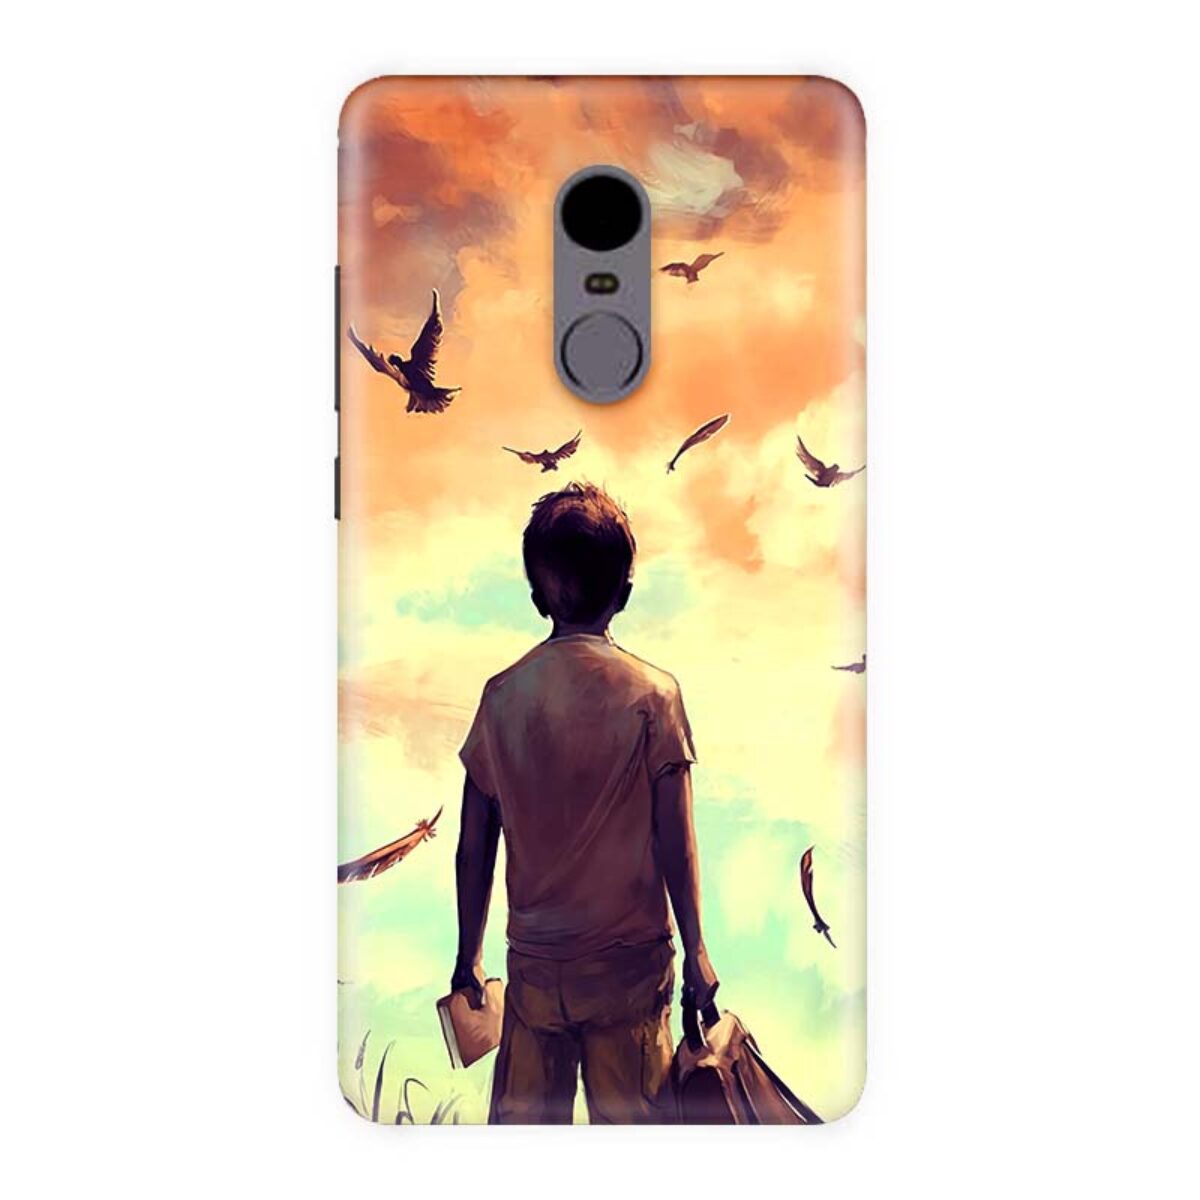 Alone Boy Redmi Note 4 Back Cover & Case At 99 Only - Spkases